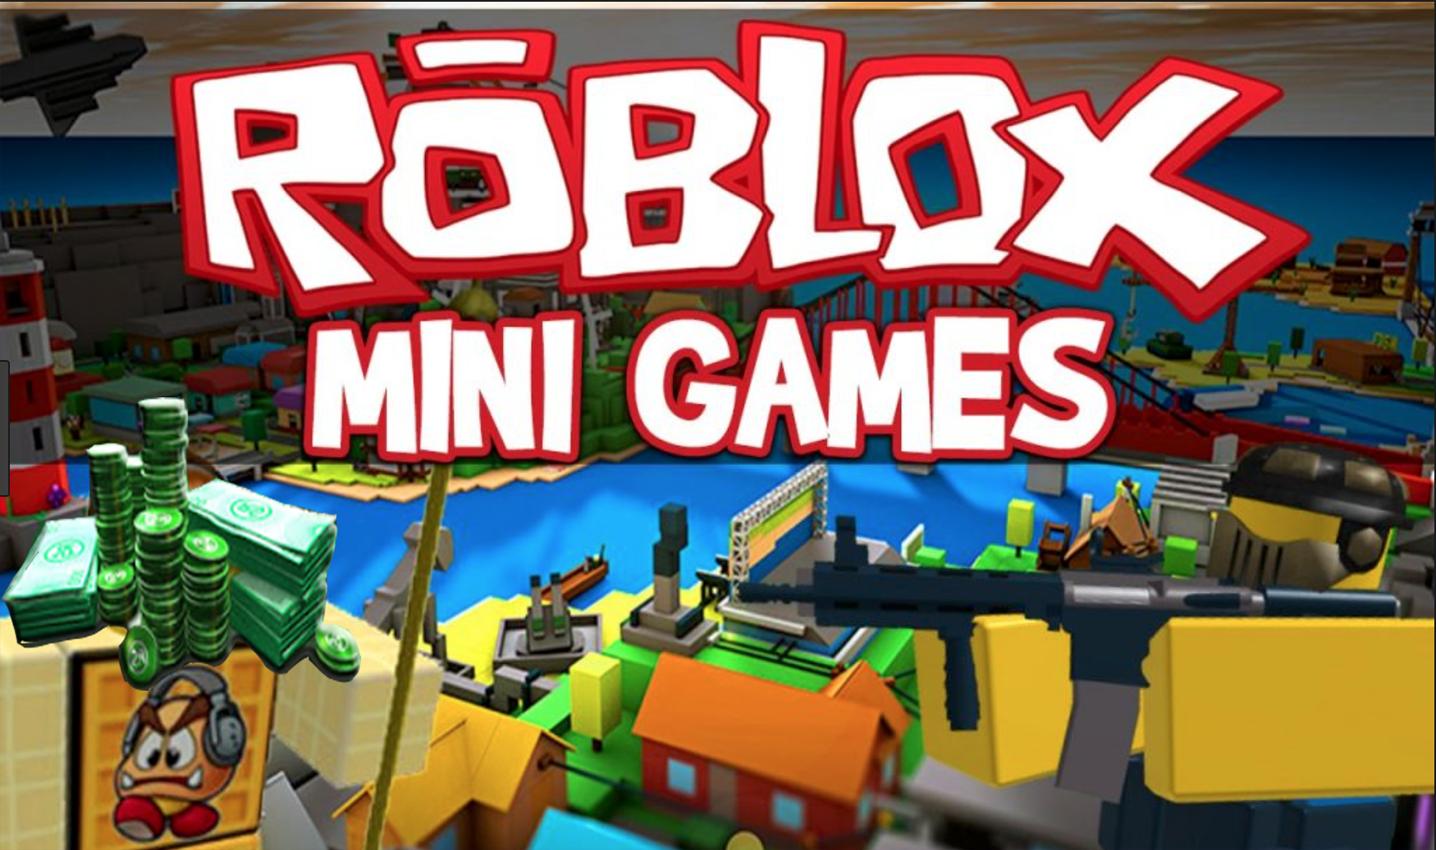 How To Get Free Robux In Roblox 2018 Pc